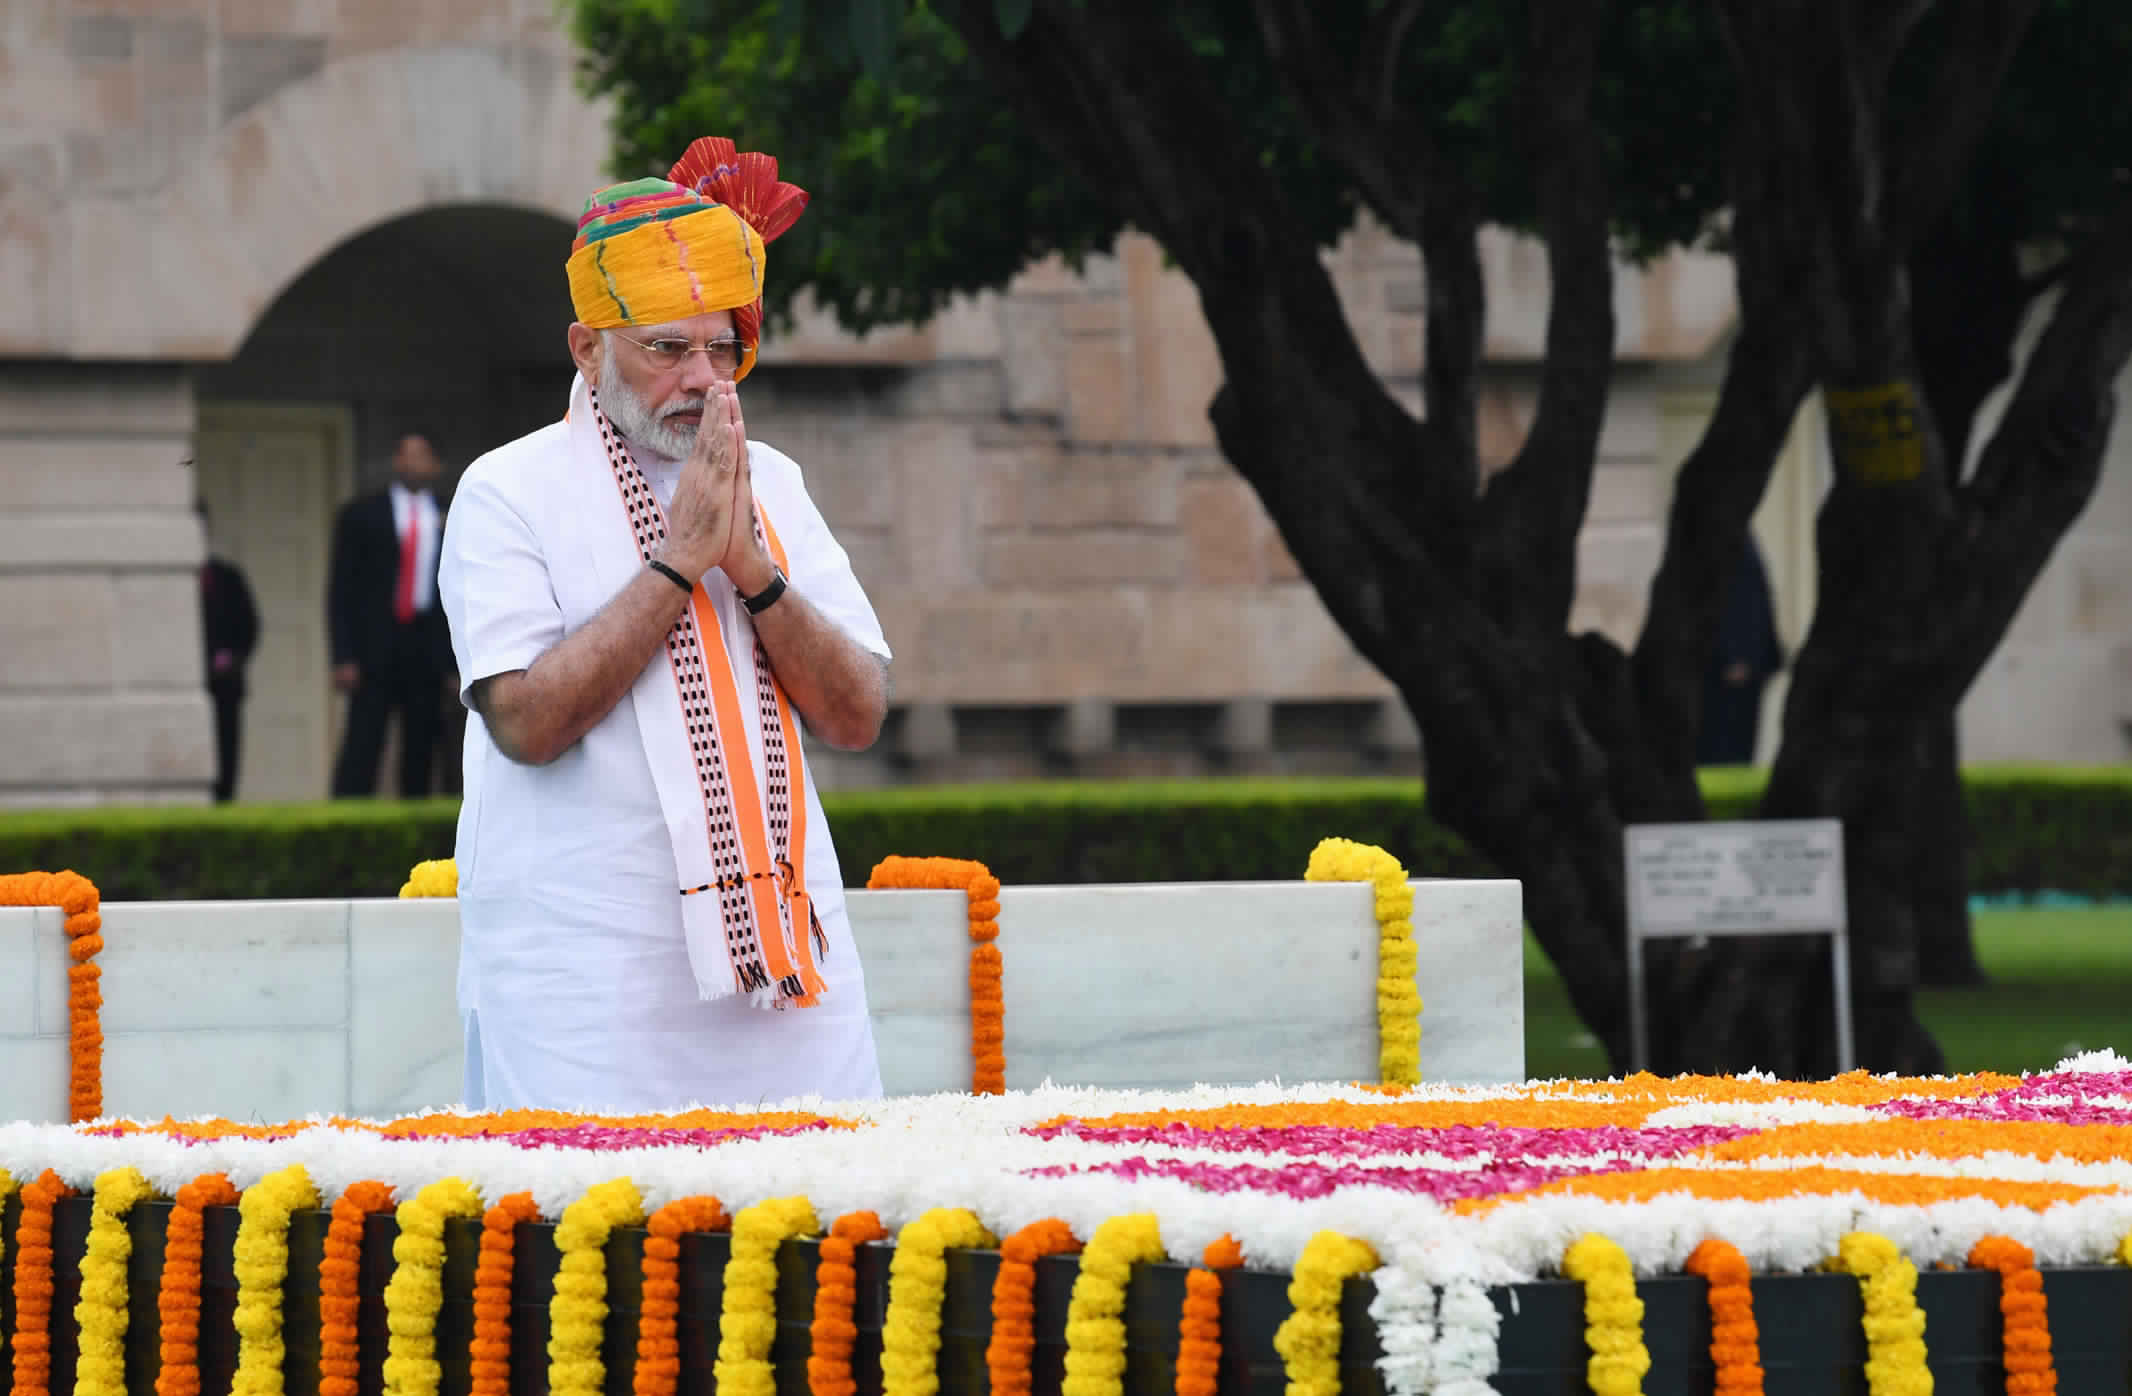 The Prime Minister, Shri Narendra Modi paying homage at the Samadhi of Mahatma Gandhi, at Rajghat, on the occasion of 73rd Independence Day, in Delhi on August 15, 2019.